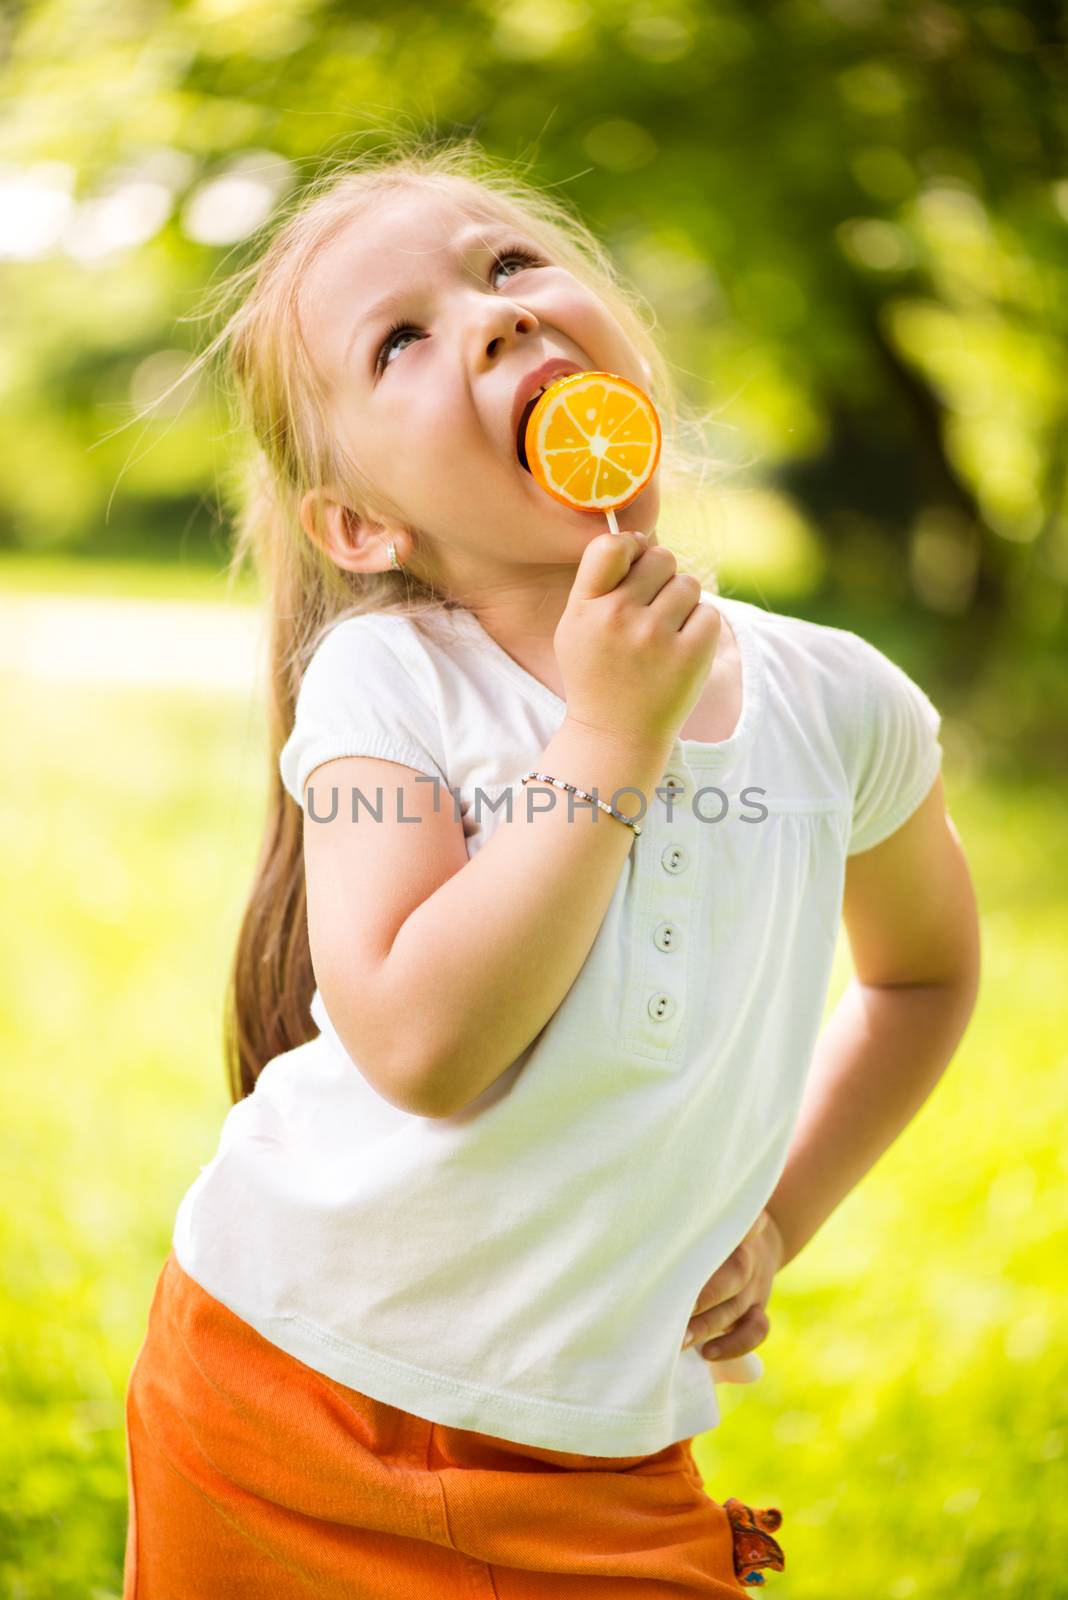 Little Girl With Lollipop by MilanMarkovic78